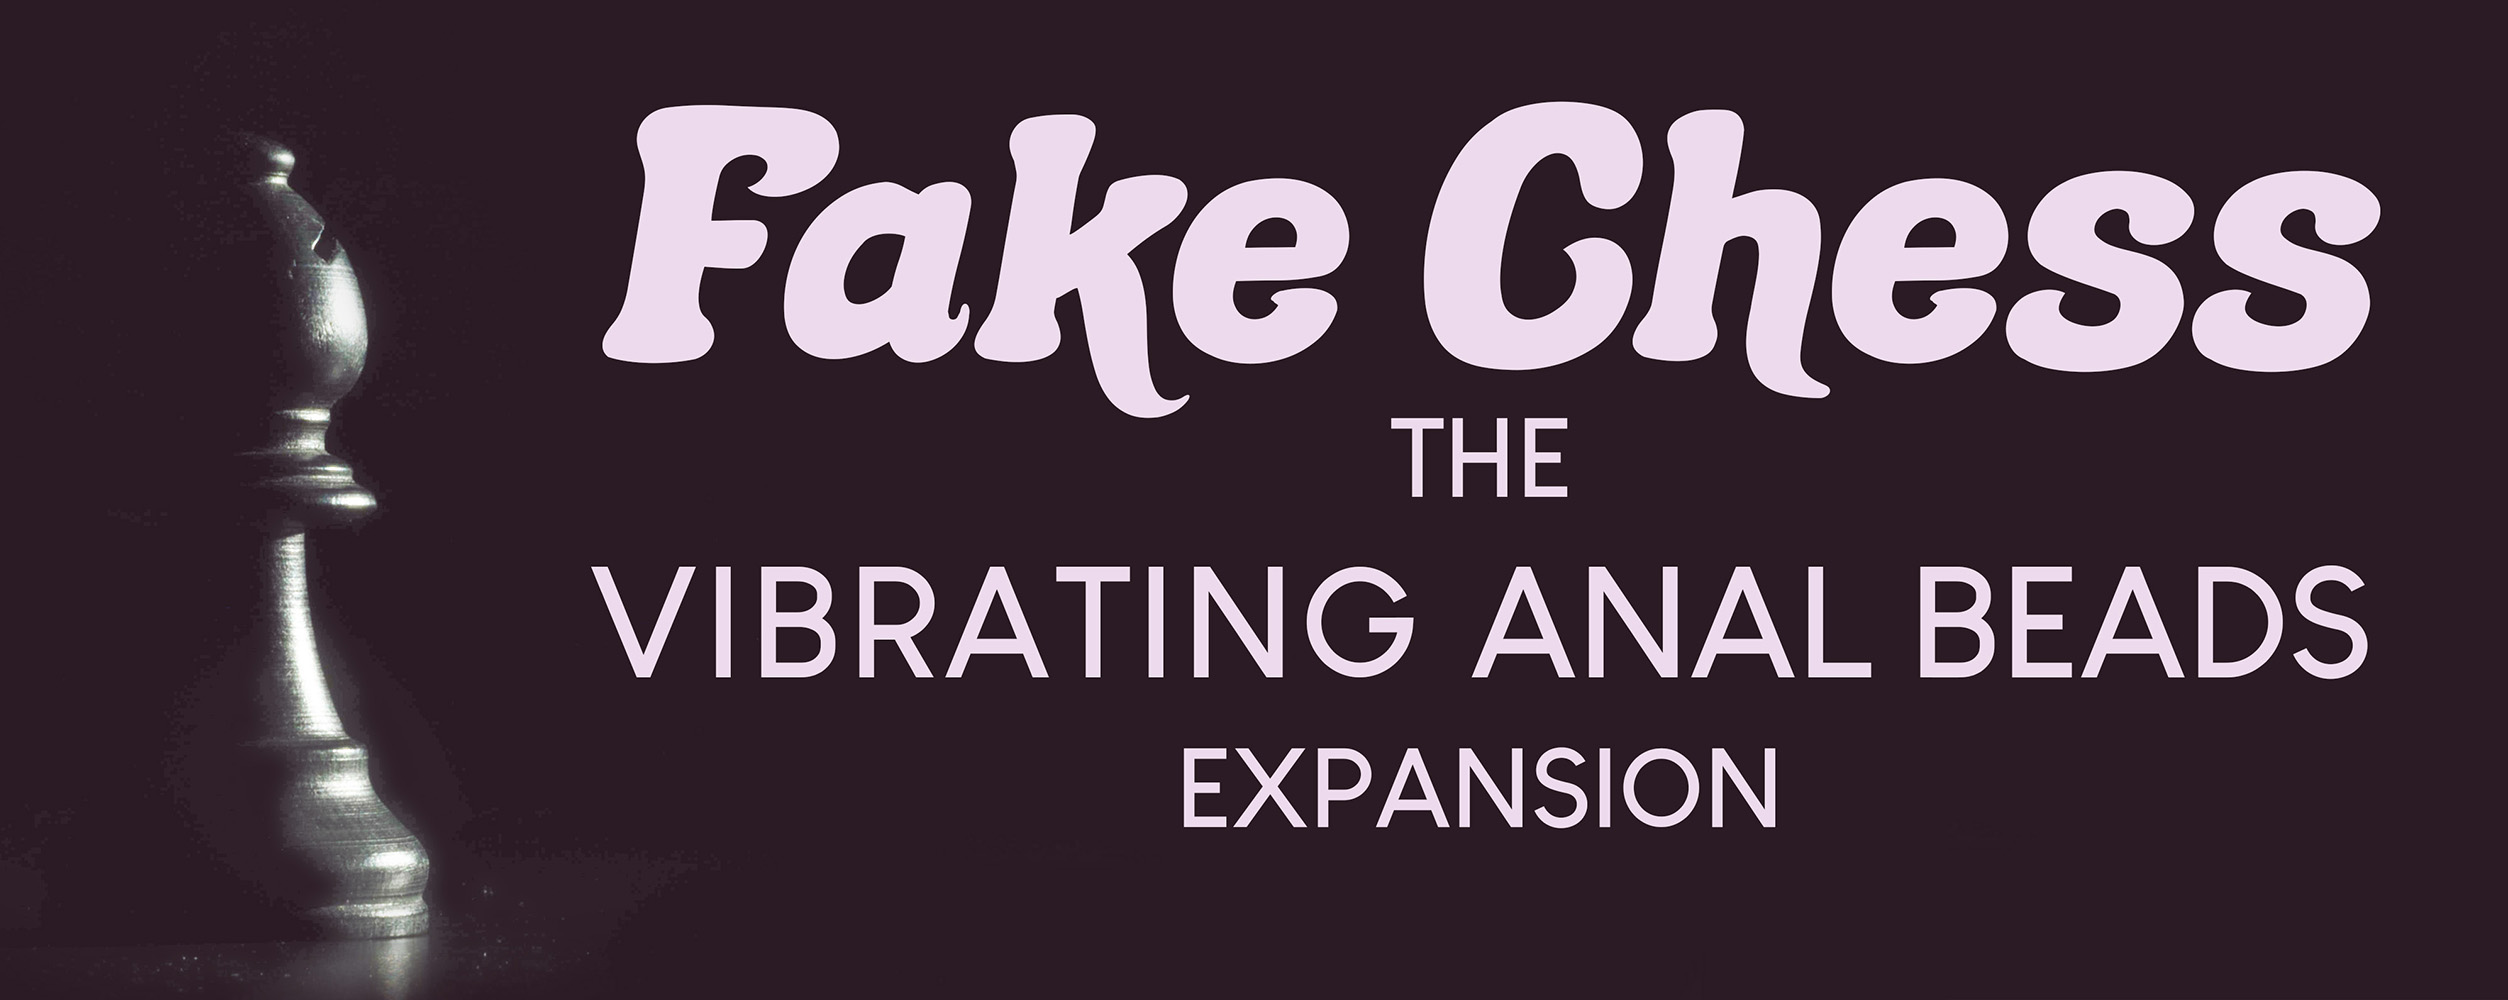 Fake Chess: The Vibrating Anal Beads Expansion